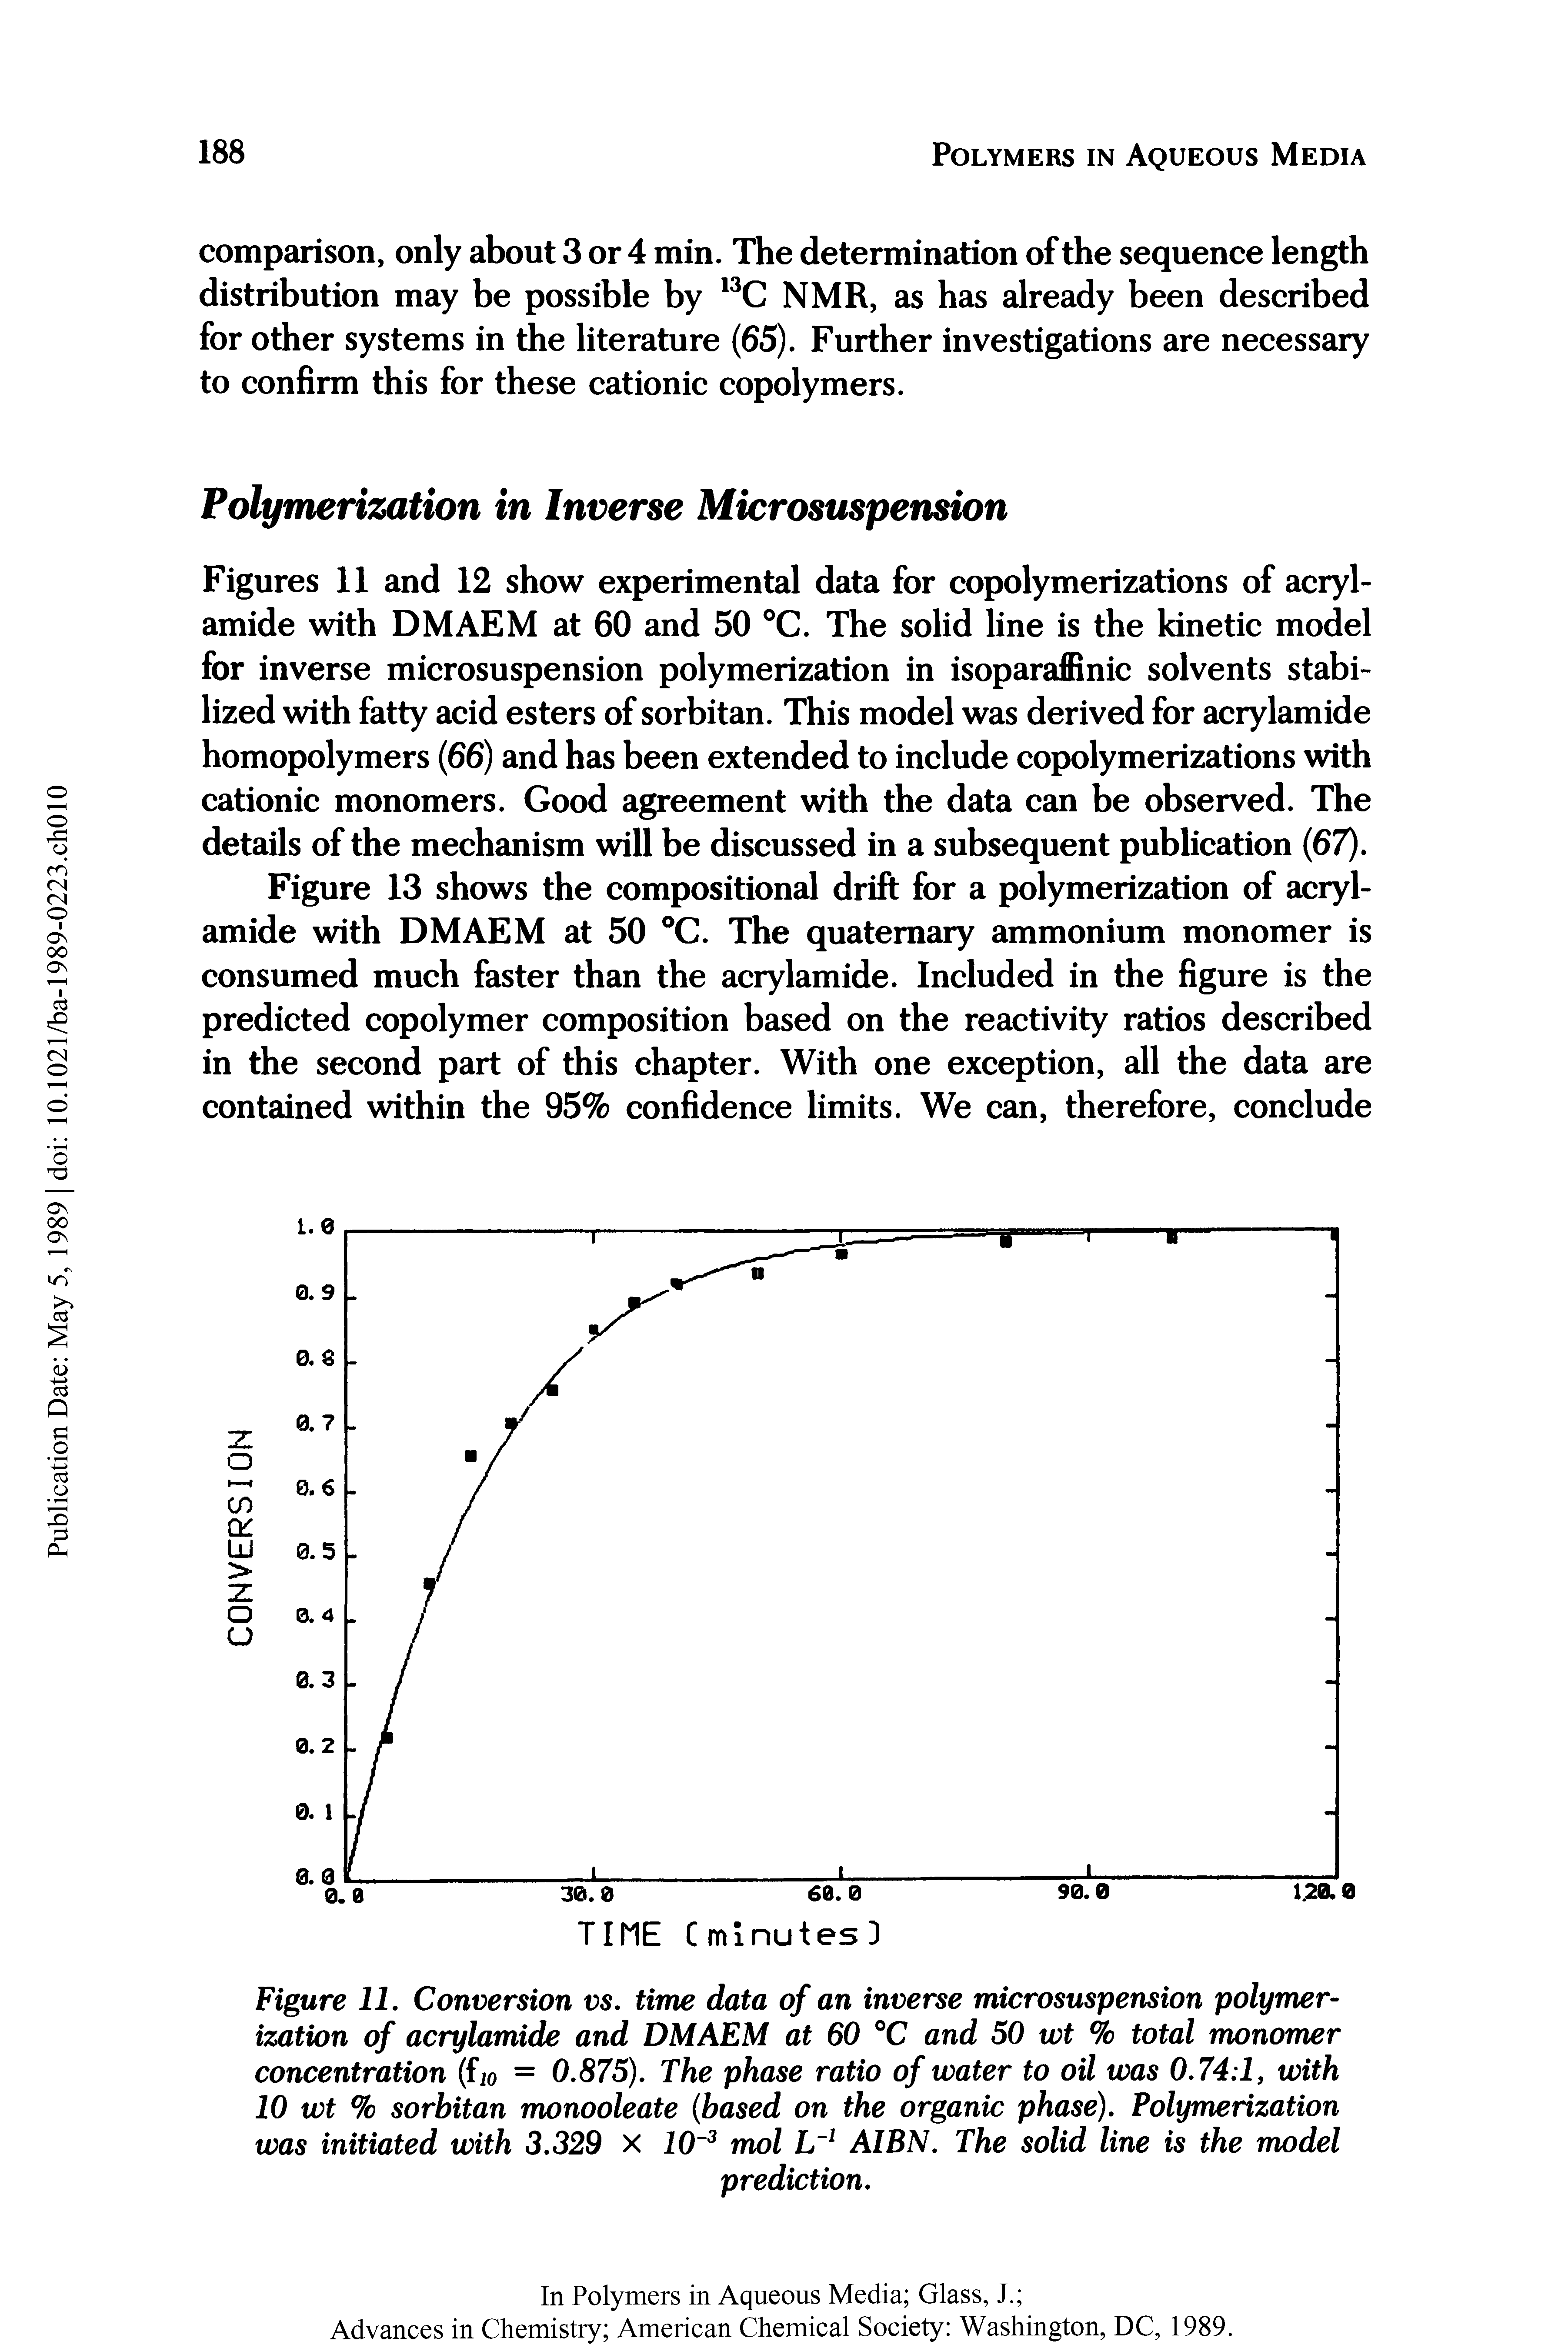 Figures 11 and 12 show experimental data for copolymerizations of acrylamide with DMAEM at 60 and 50 C. The solid line is the kinetic model for inverse microsuspension polymerization in isoparaffinic solvents stabilized with fatty acid esters of sorbitan. This model was derived for acrylamide homopolymers (66) and has been extended to include copolymerizations with cationic monomers. Good agreement with the data can be observed. The details of the mechanism will be discussed in a subsequent publication (67).